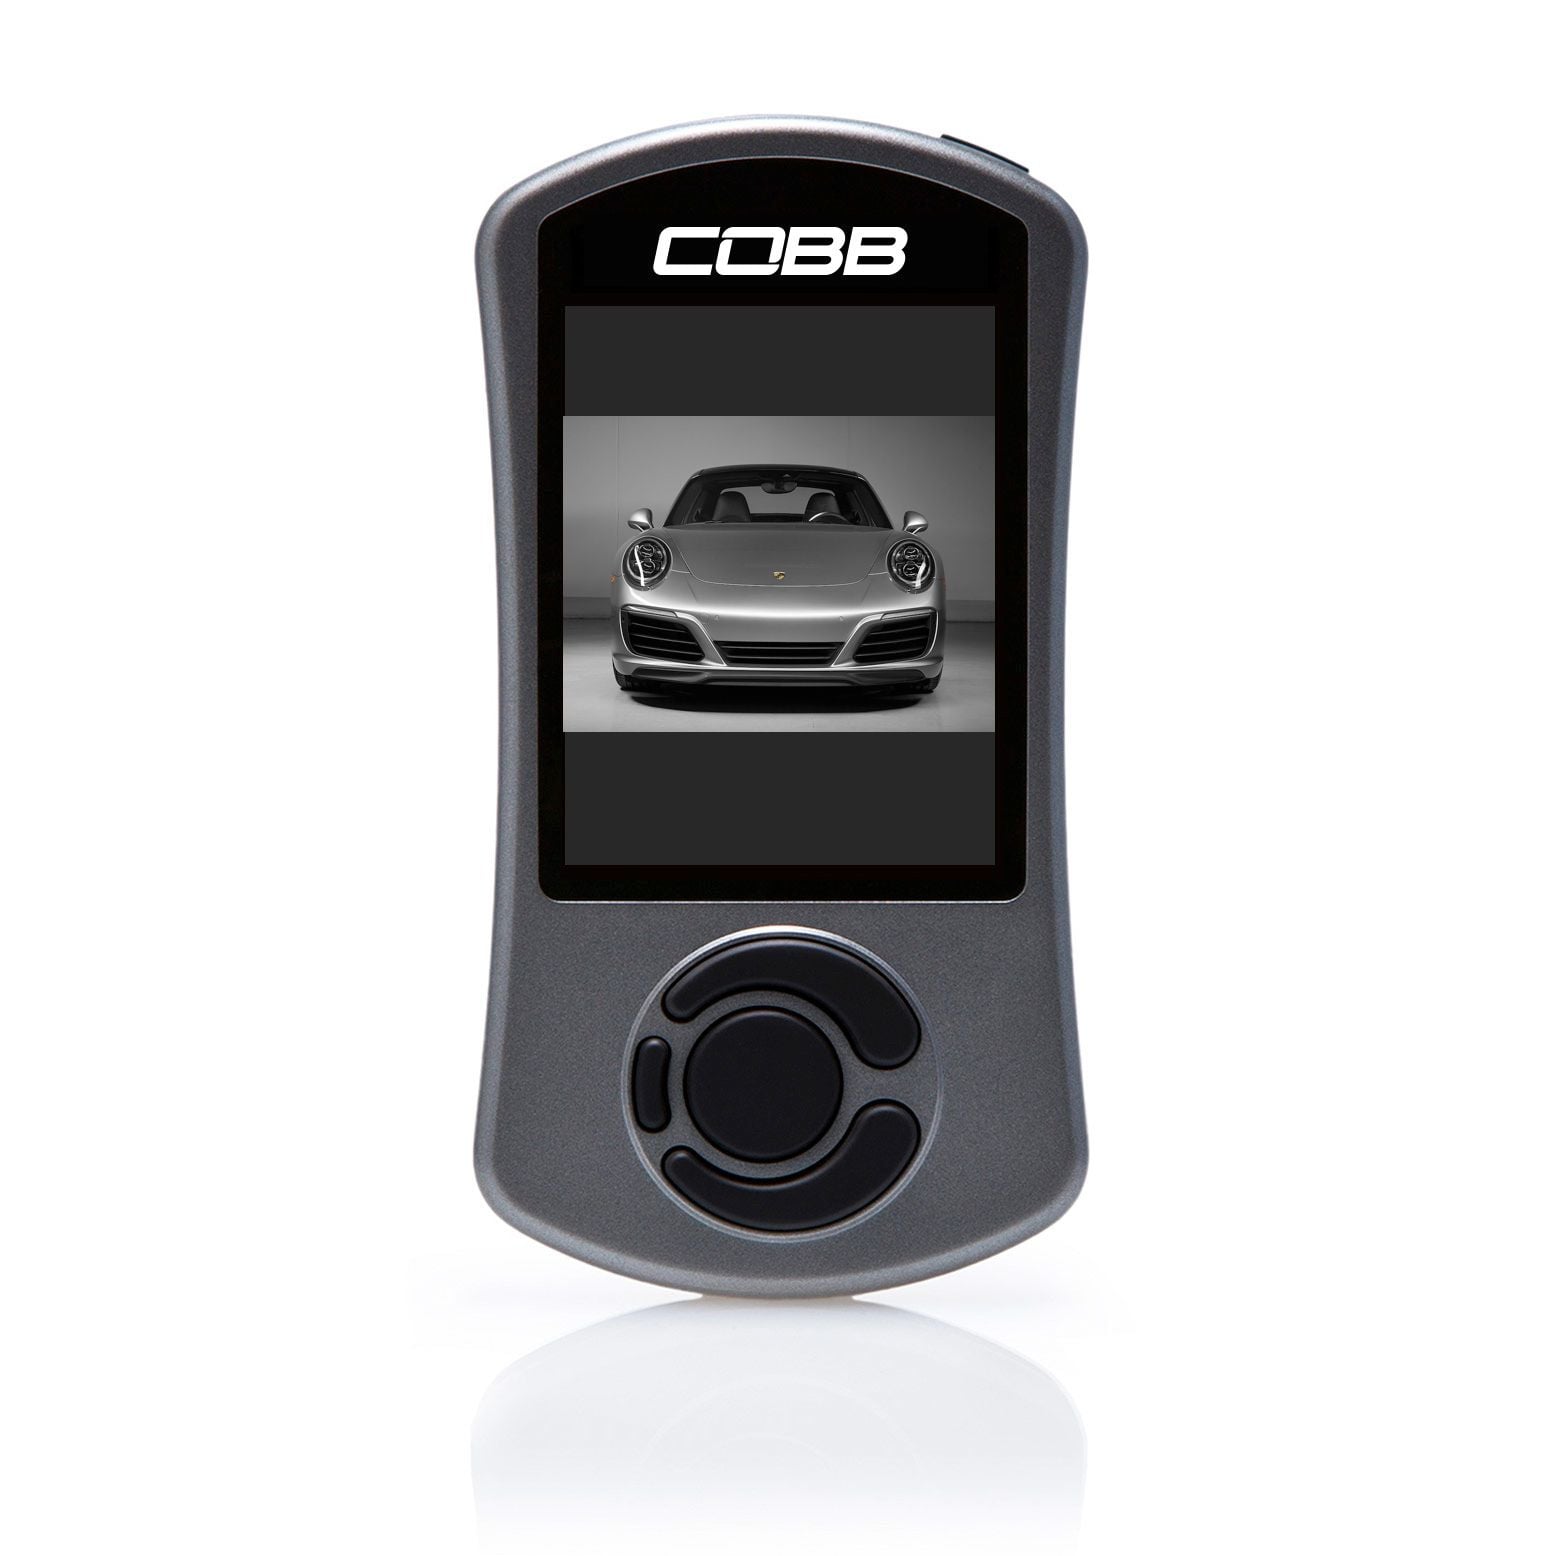 Engine - Power Adders - New Cobb Tuning Accessport with PDK Flashing for 991.1 Carrera, 981 Cayman/Boxster - New - Brighton, MA 02135, United States